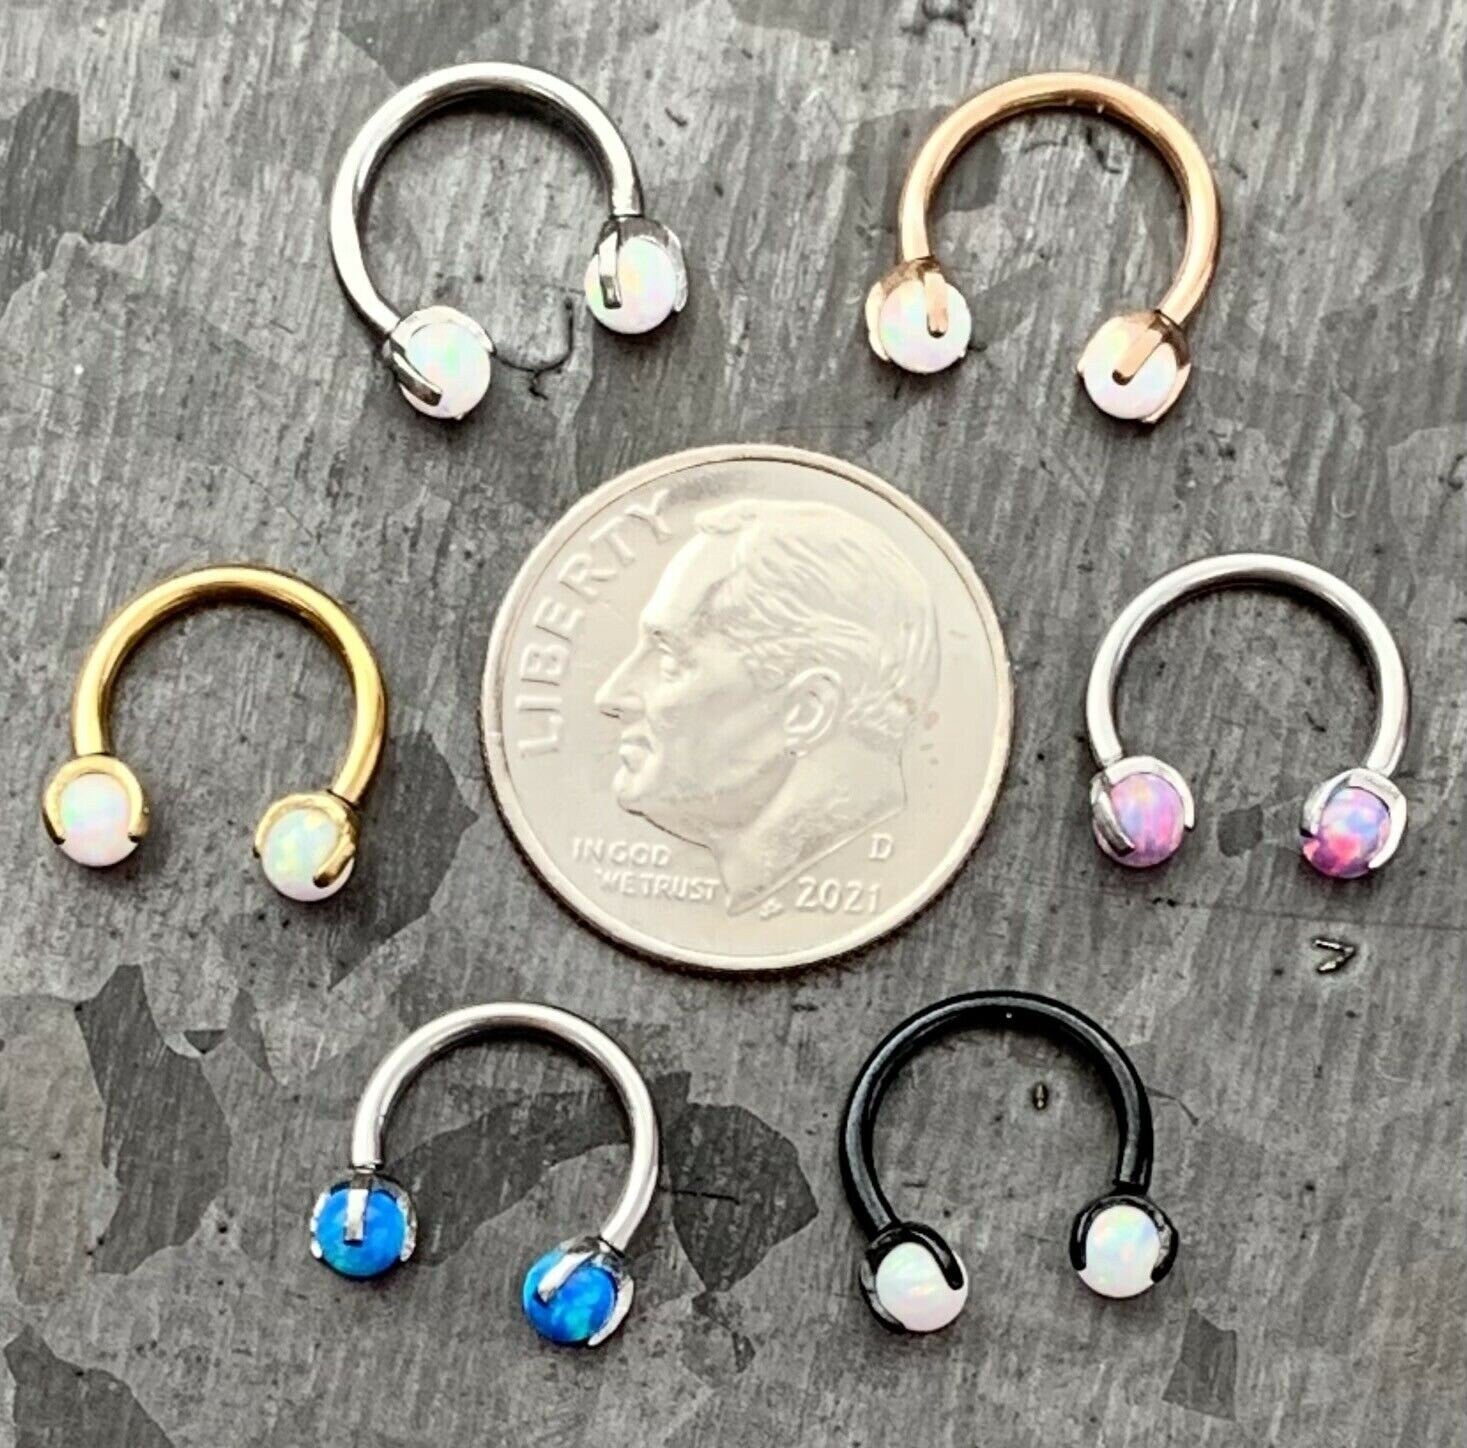 1 Piece of Claw Set Opal Balls Circular Horseshoe Septum Ring - 16g - 8mm - Steel Pink, Blue or White, Black, Gold, Rose Gold Available!